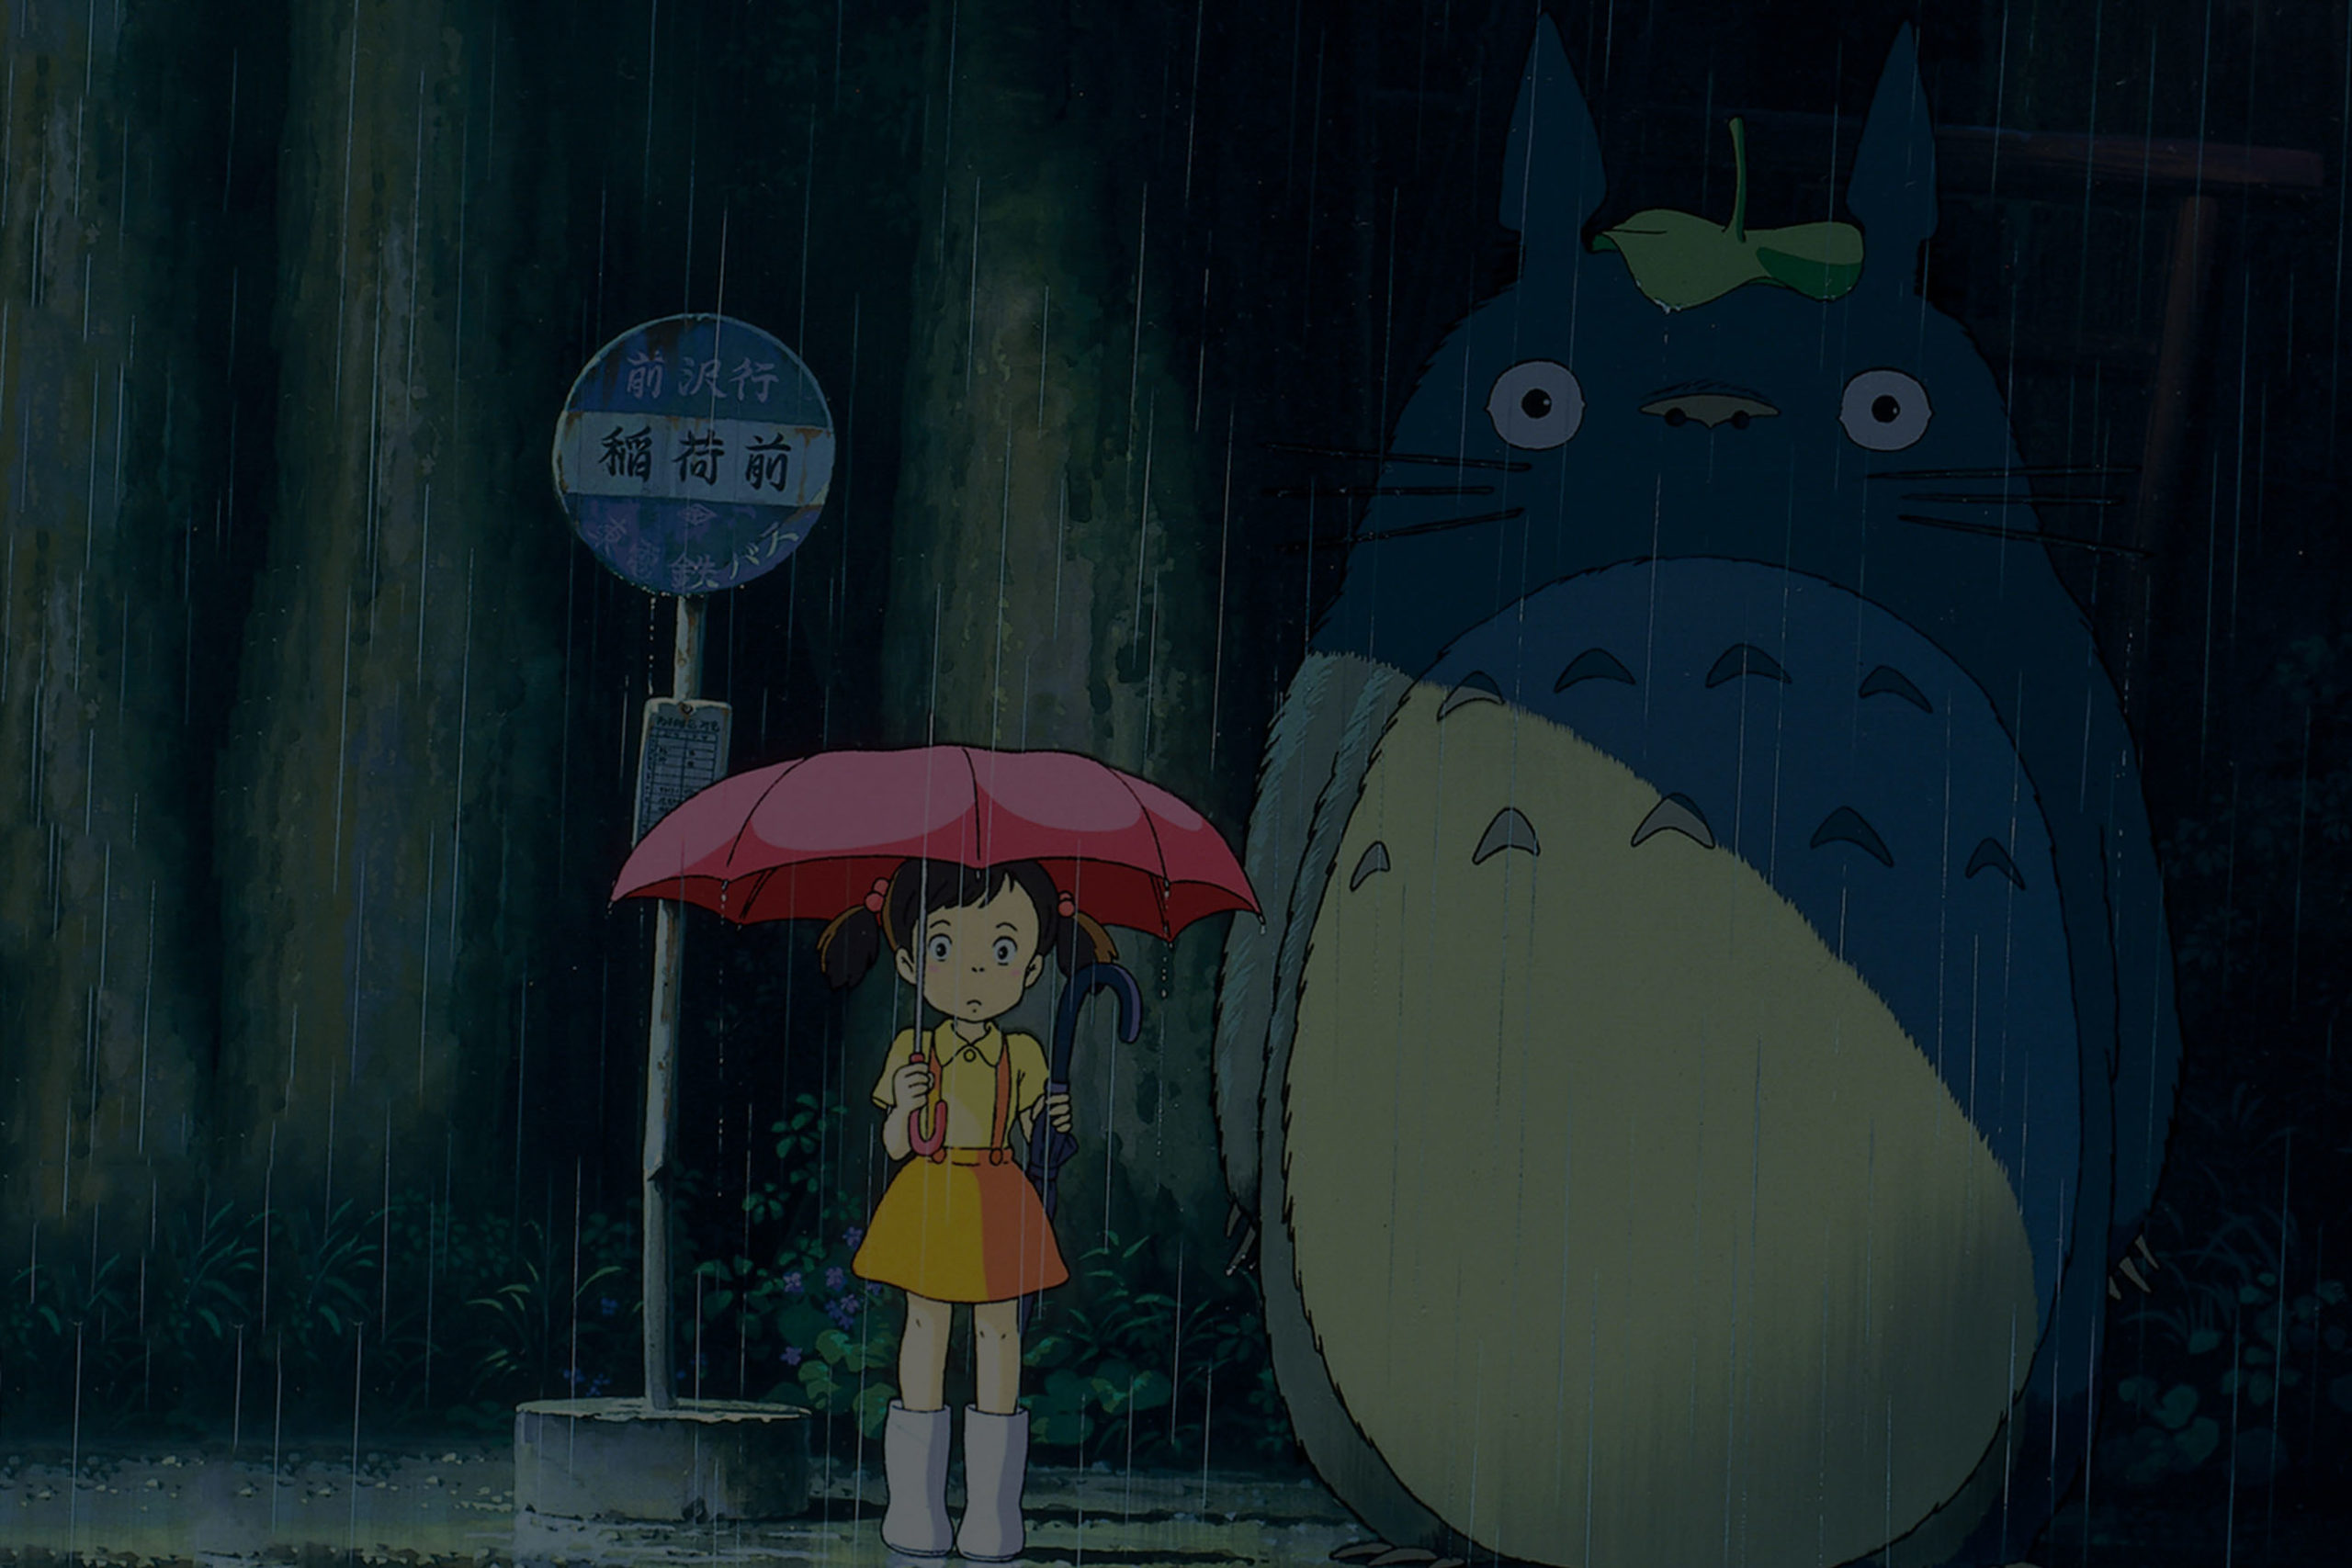 Totoro in Uncertain Times. “Everybody try laughing, then whatever